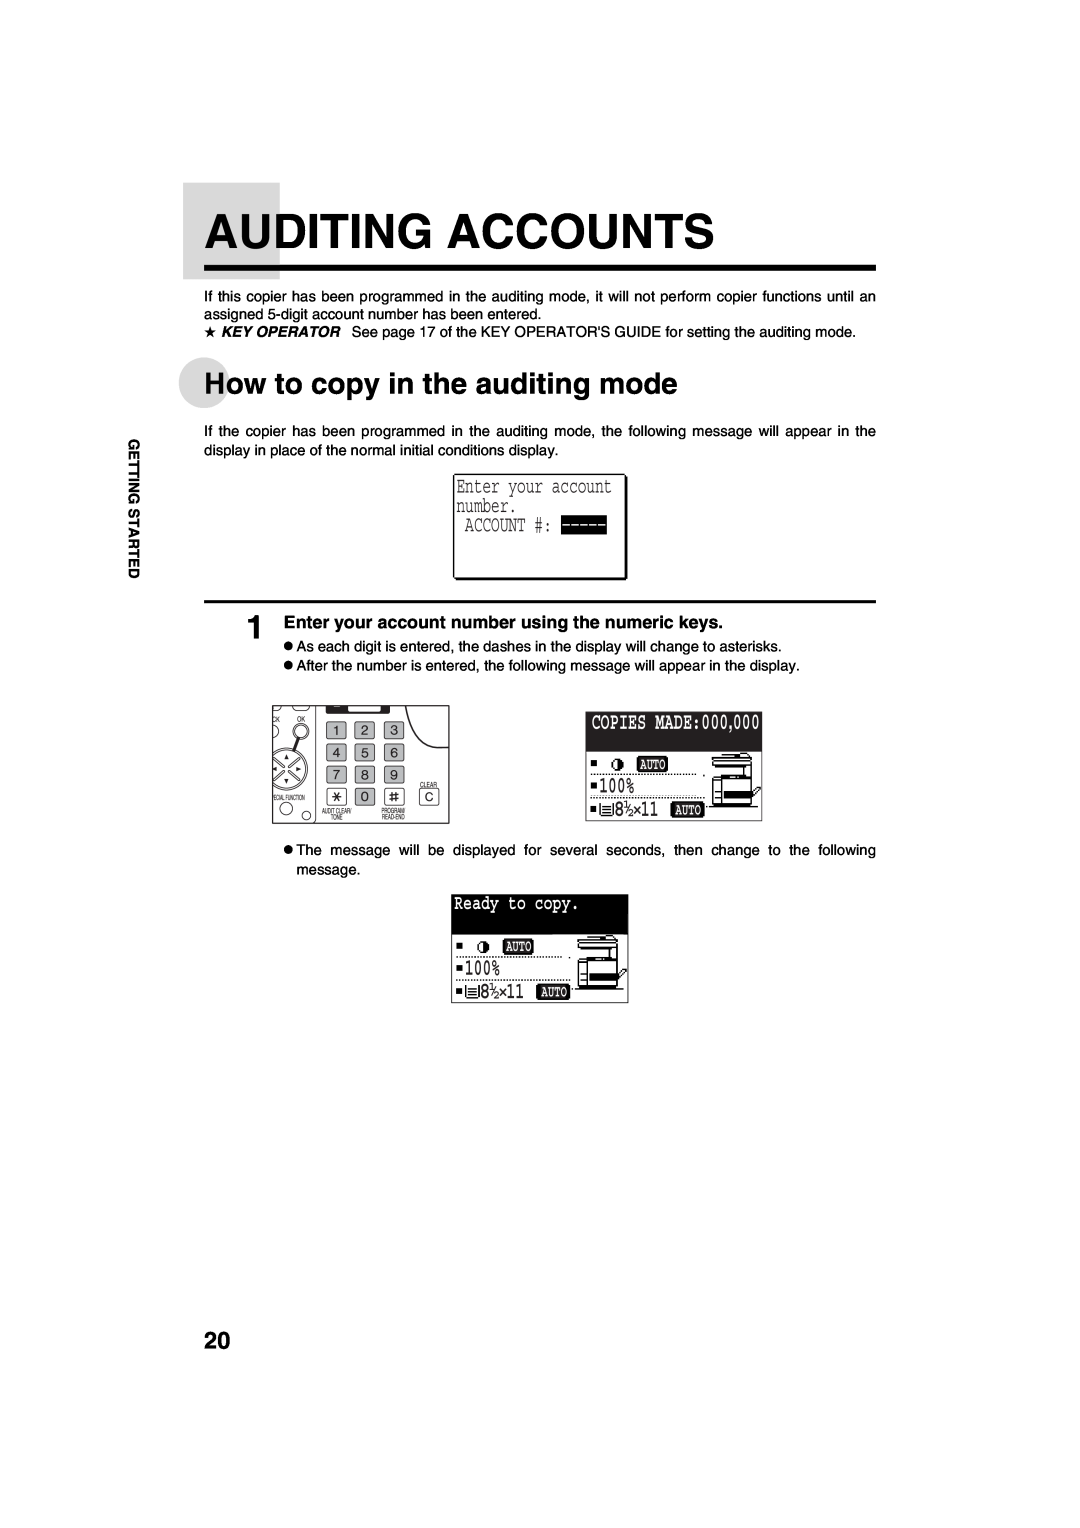 Sharp AR-M208 Auditing Accounts, How to copy in the auditing mode, COPIES MADE000,000, Account #, 100%, Ready to copy 